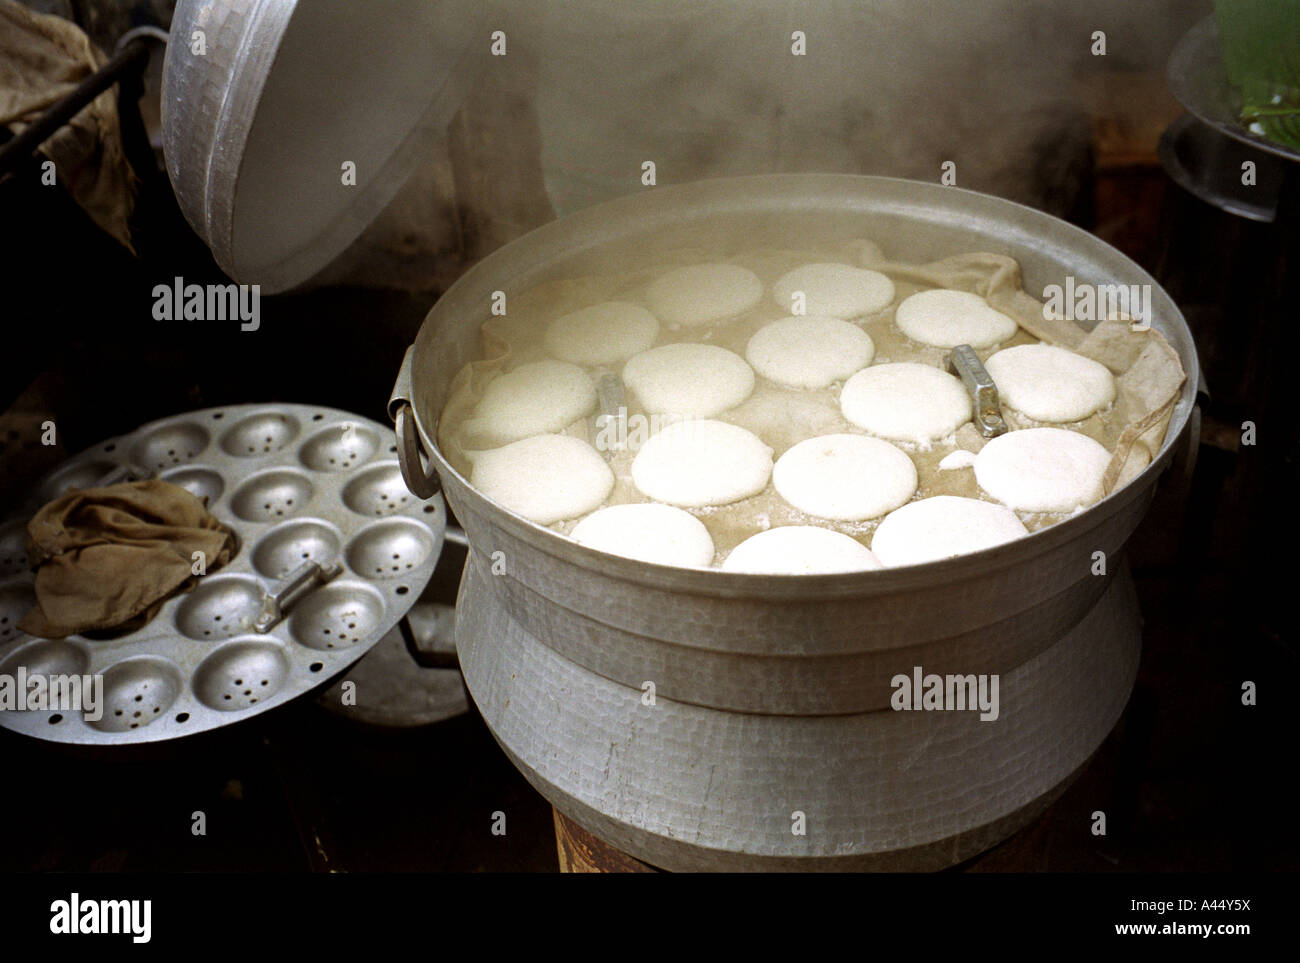 Steaming Idlys - South India Stock Photo